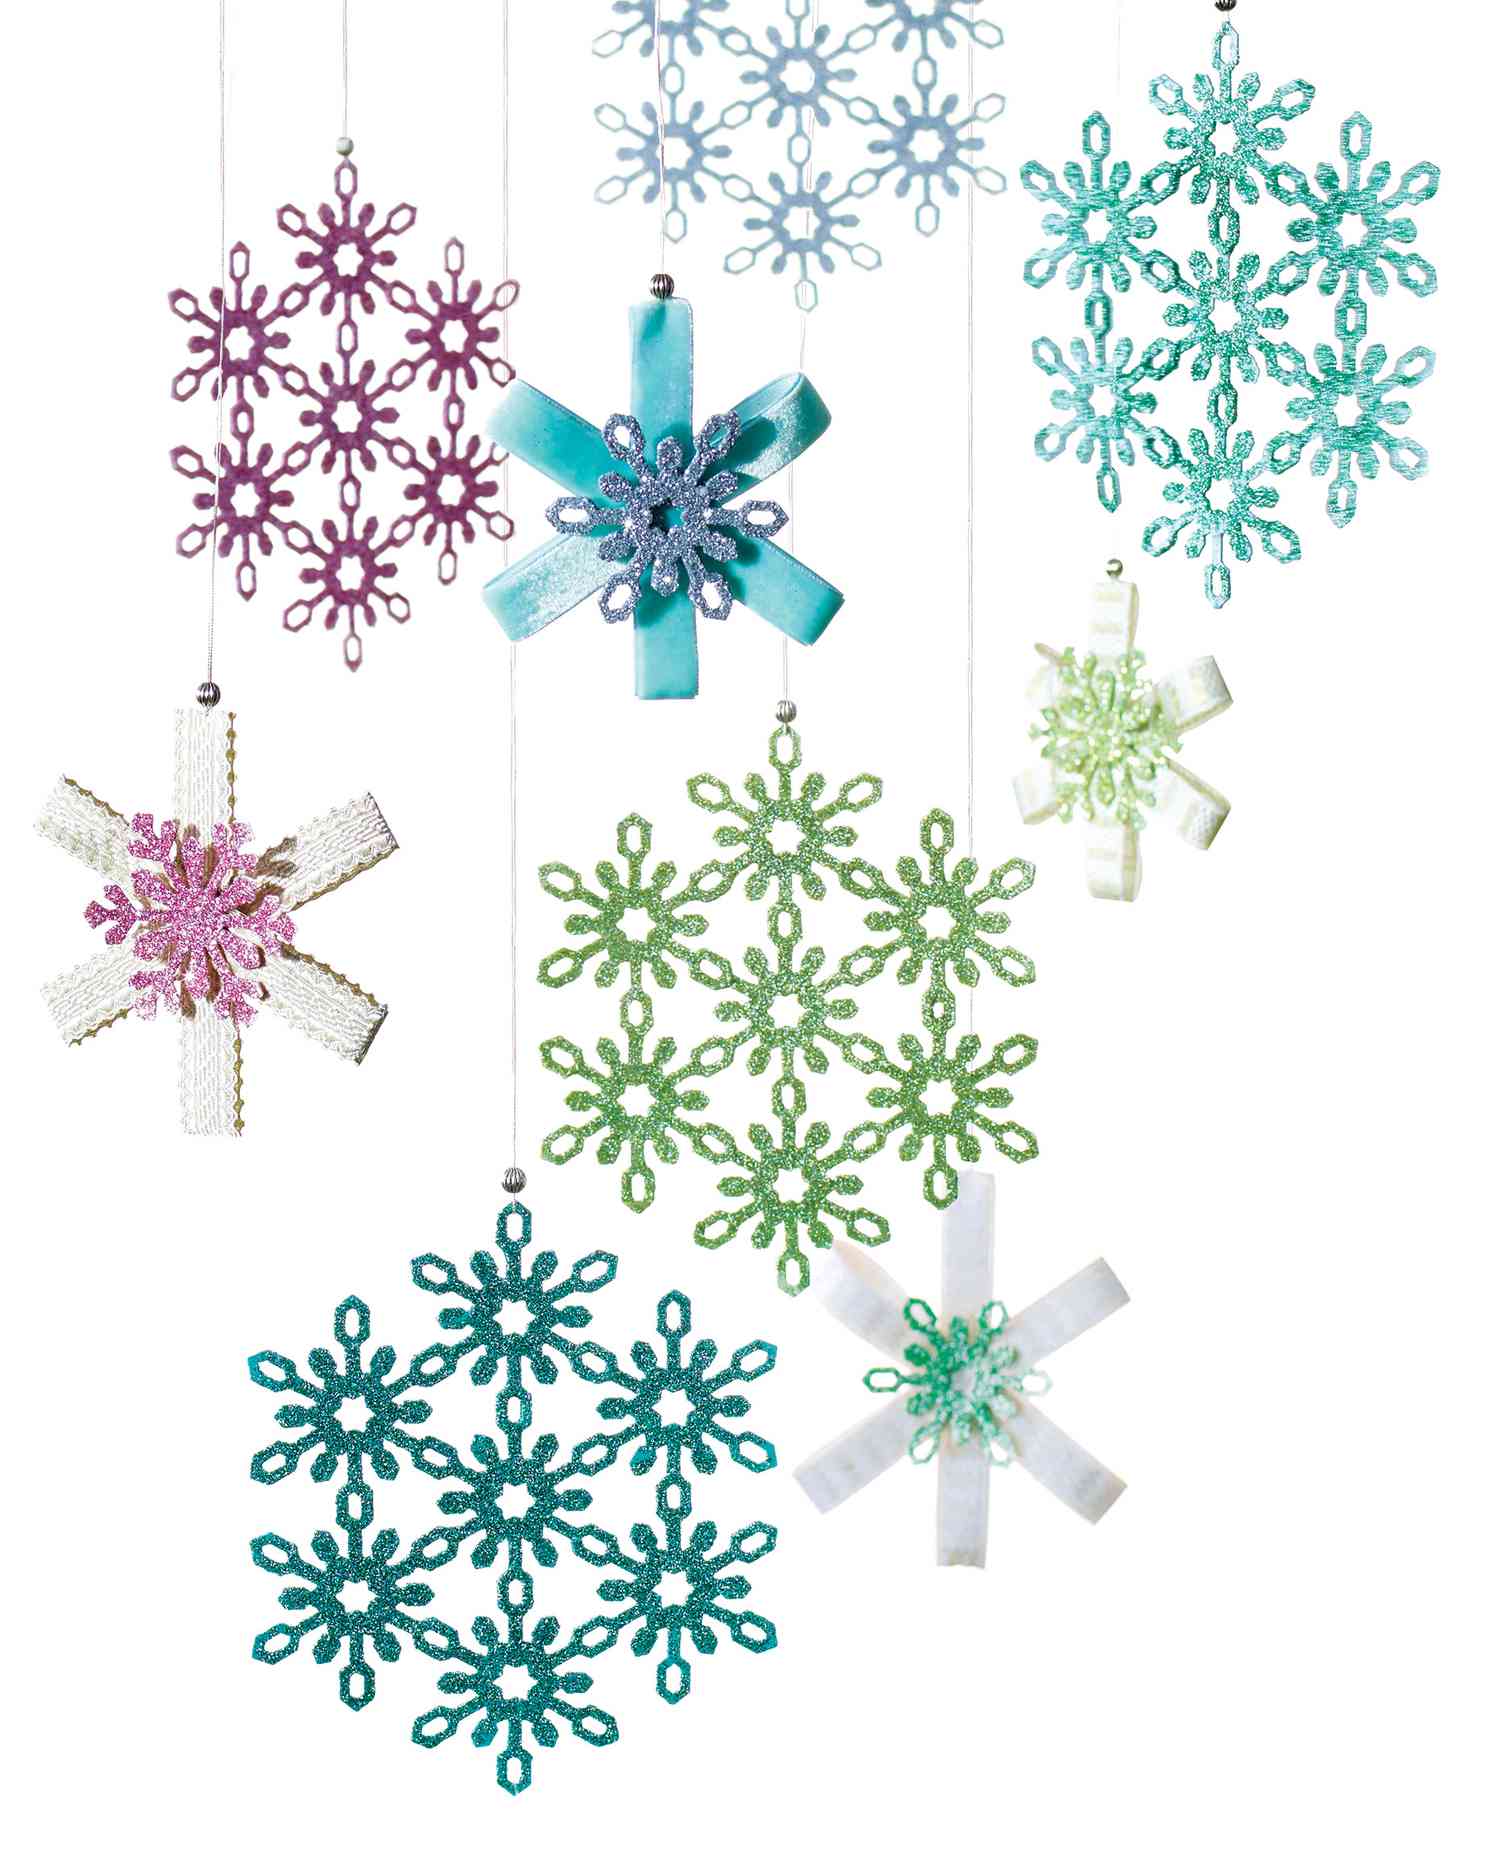 12PCS 3D Snowflake Hanging Decorations Hexagonal Embellishments with String for Winter Christmas New Year Party Wedding Home Decoration Artflower Paper Snowflake Pendant Pink